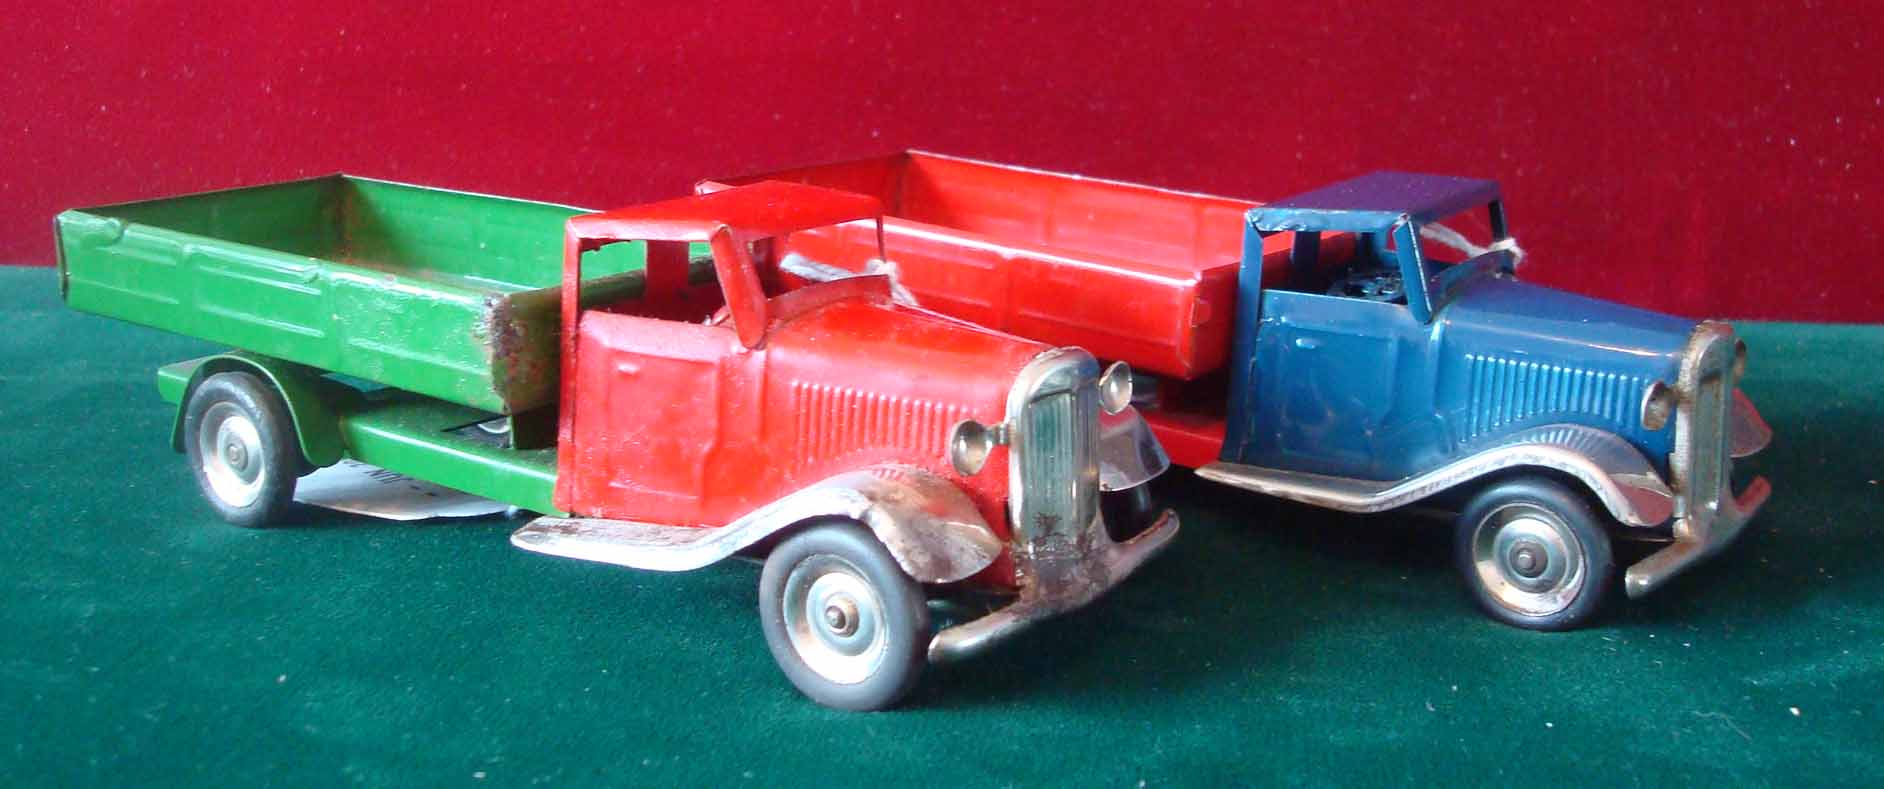 Triang Minic No.10M Delivery Lorry: Blue standard cab, brick red chassis and open back, plated